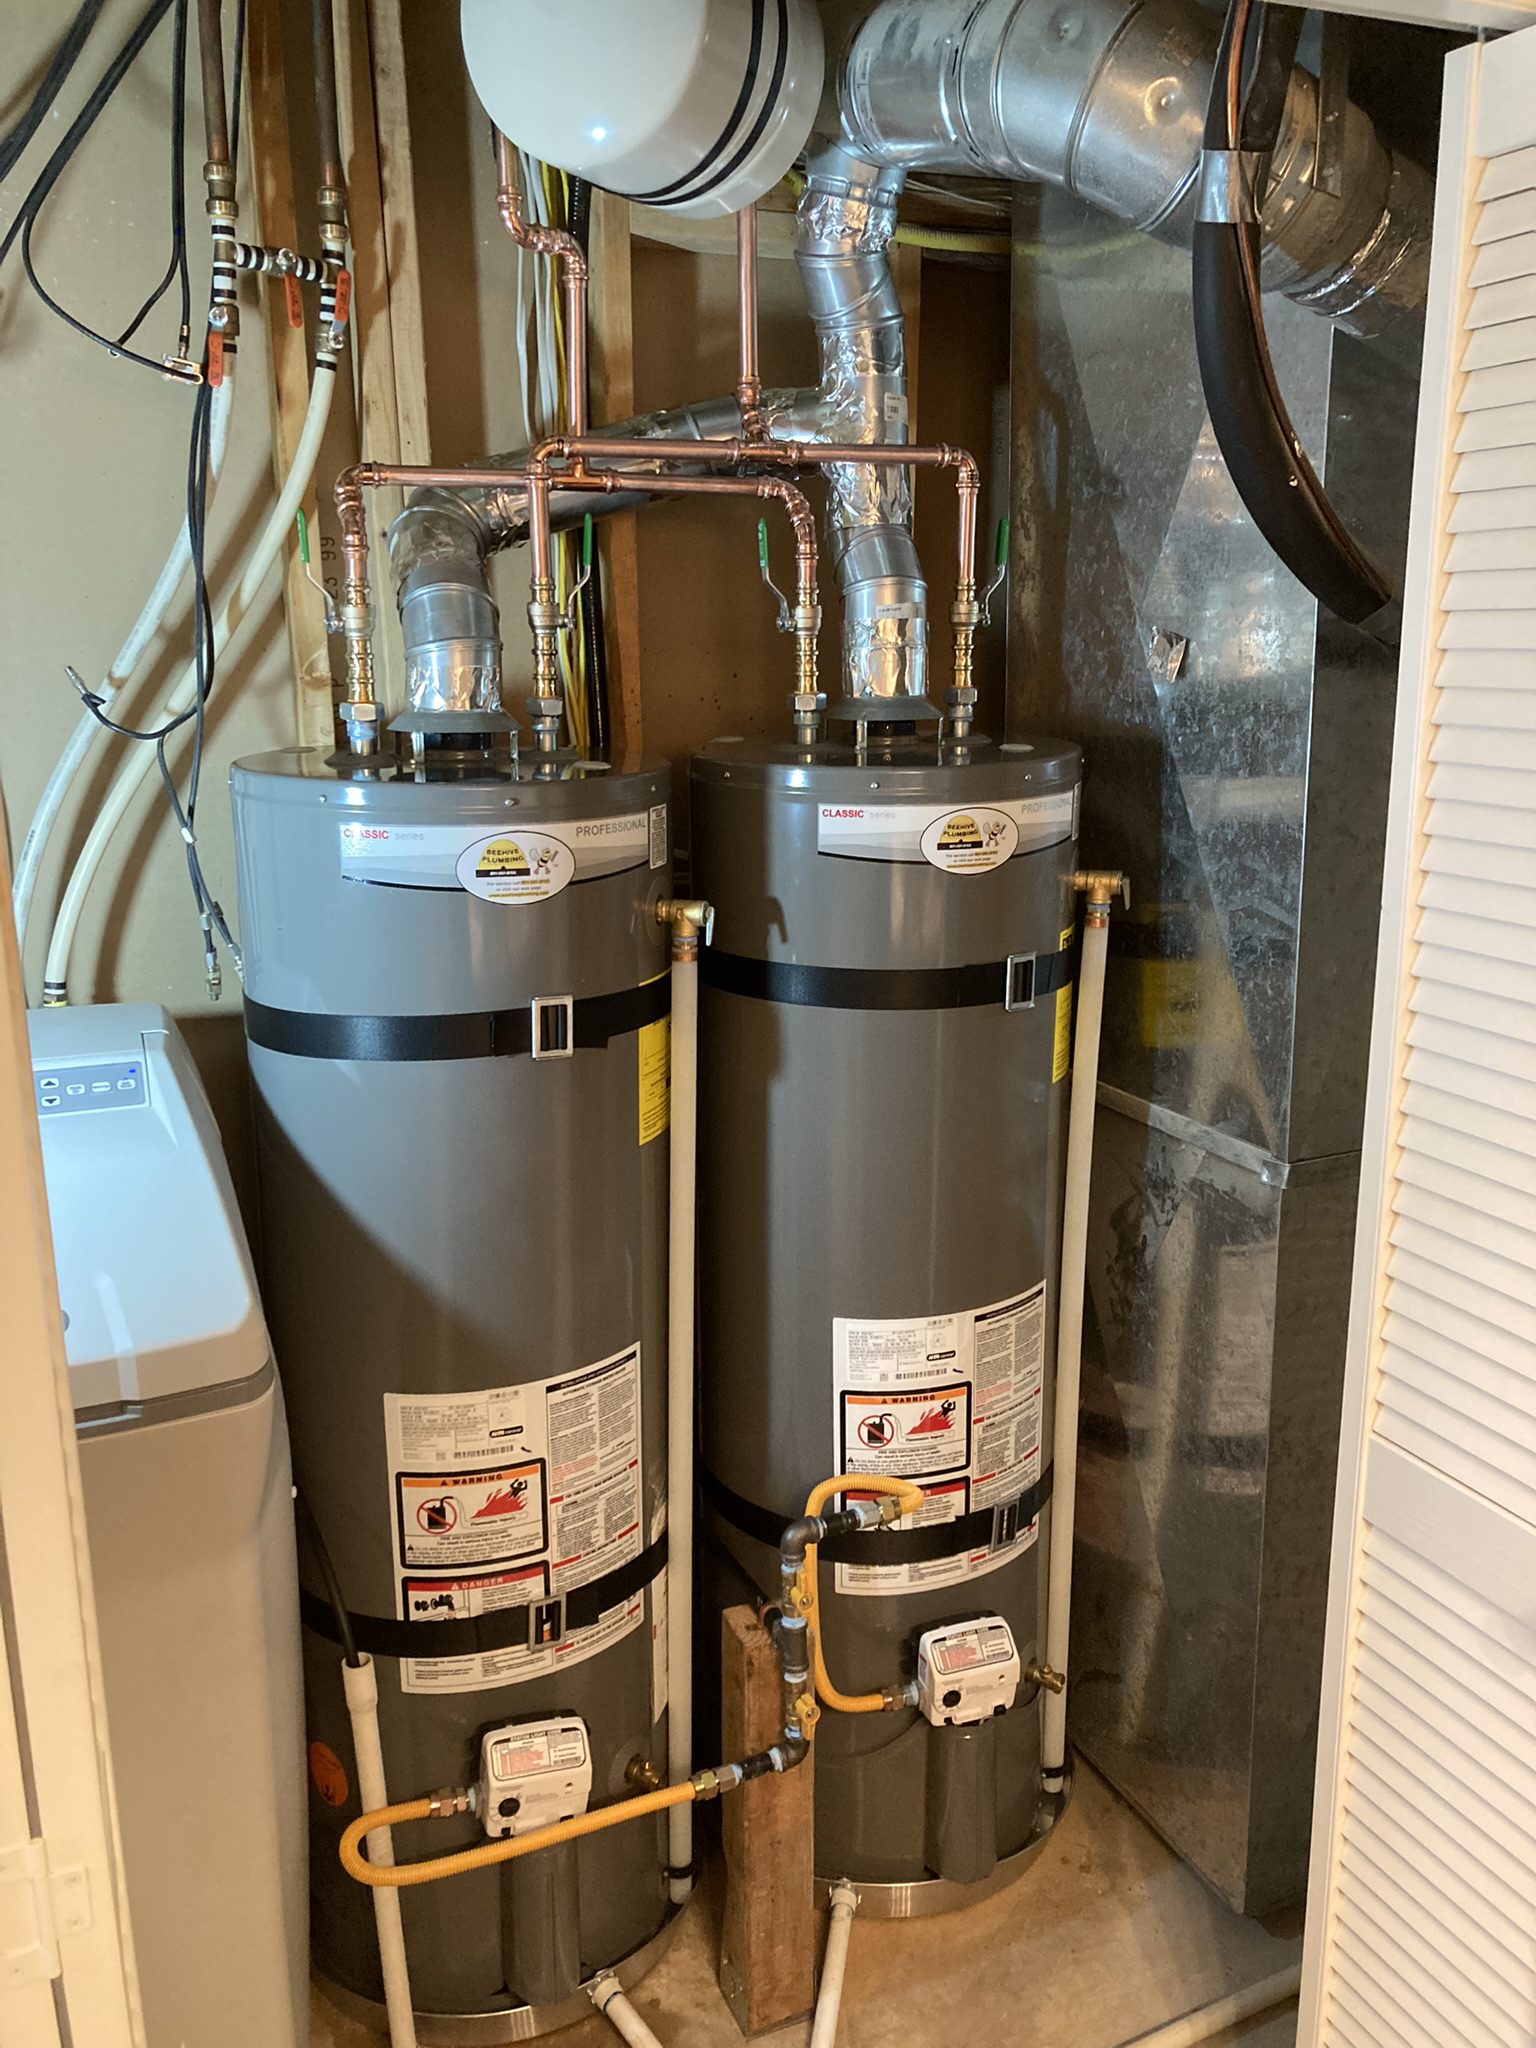 Electric Vs Gas Water Heater: Which Is Cheaper To Run?